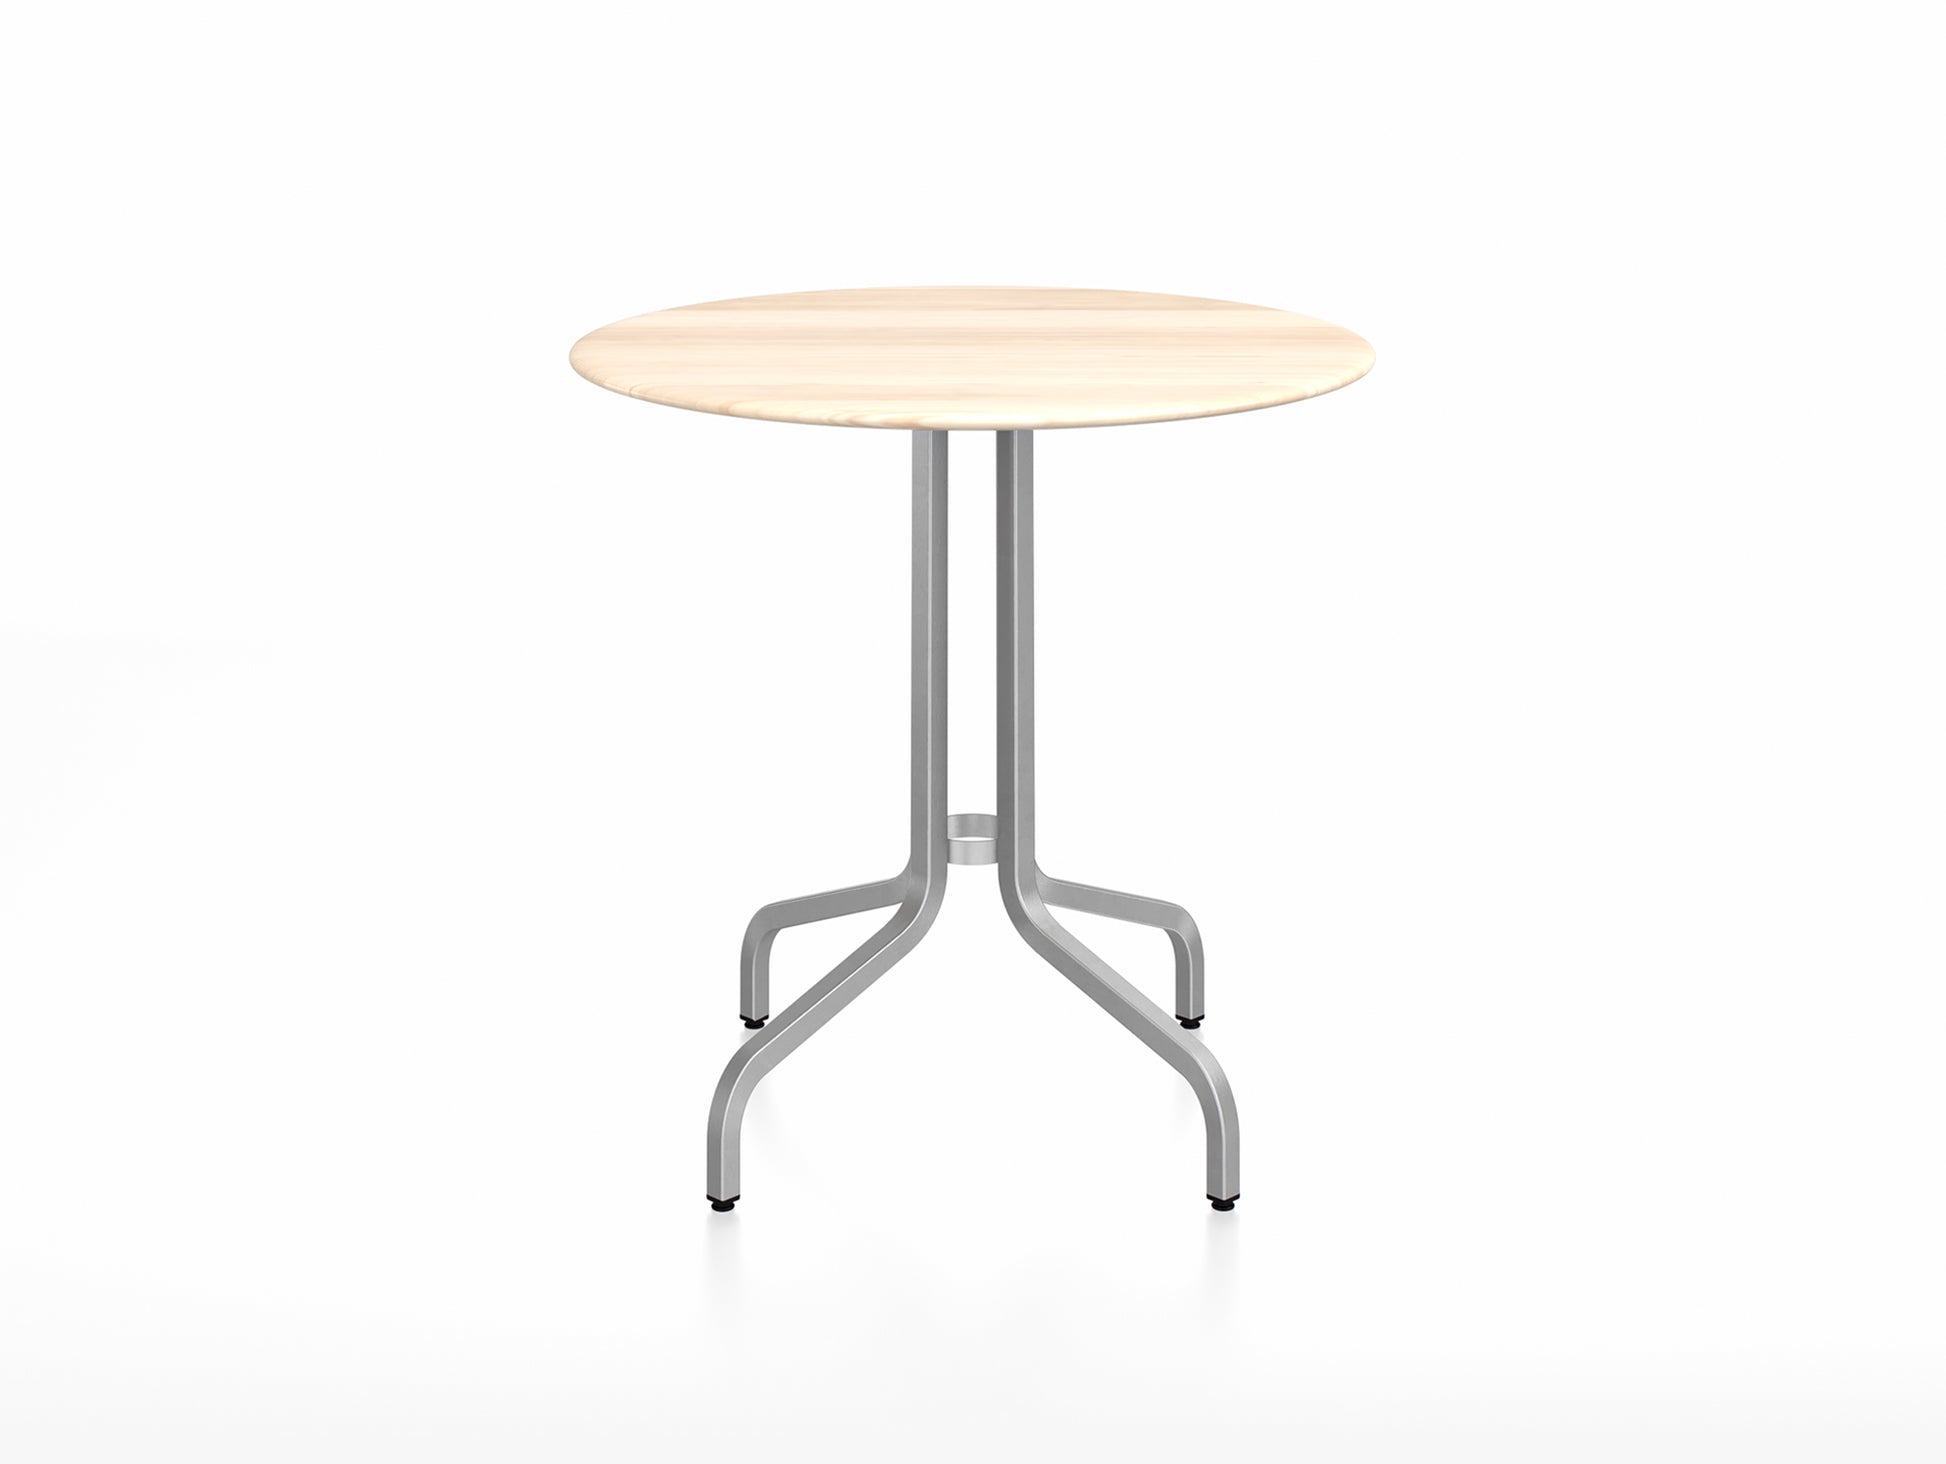 1 Inch Outdoor Cafe Table by Emeco - Round (Diameter: 76 cm) / Hand Brushed Aluminium Base / Accoya Wood Tabletop